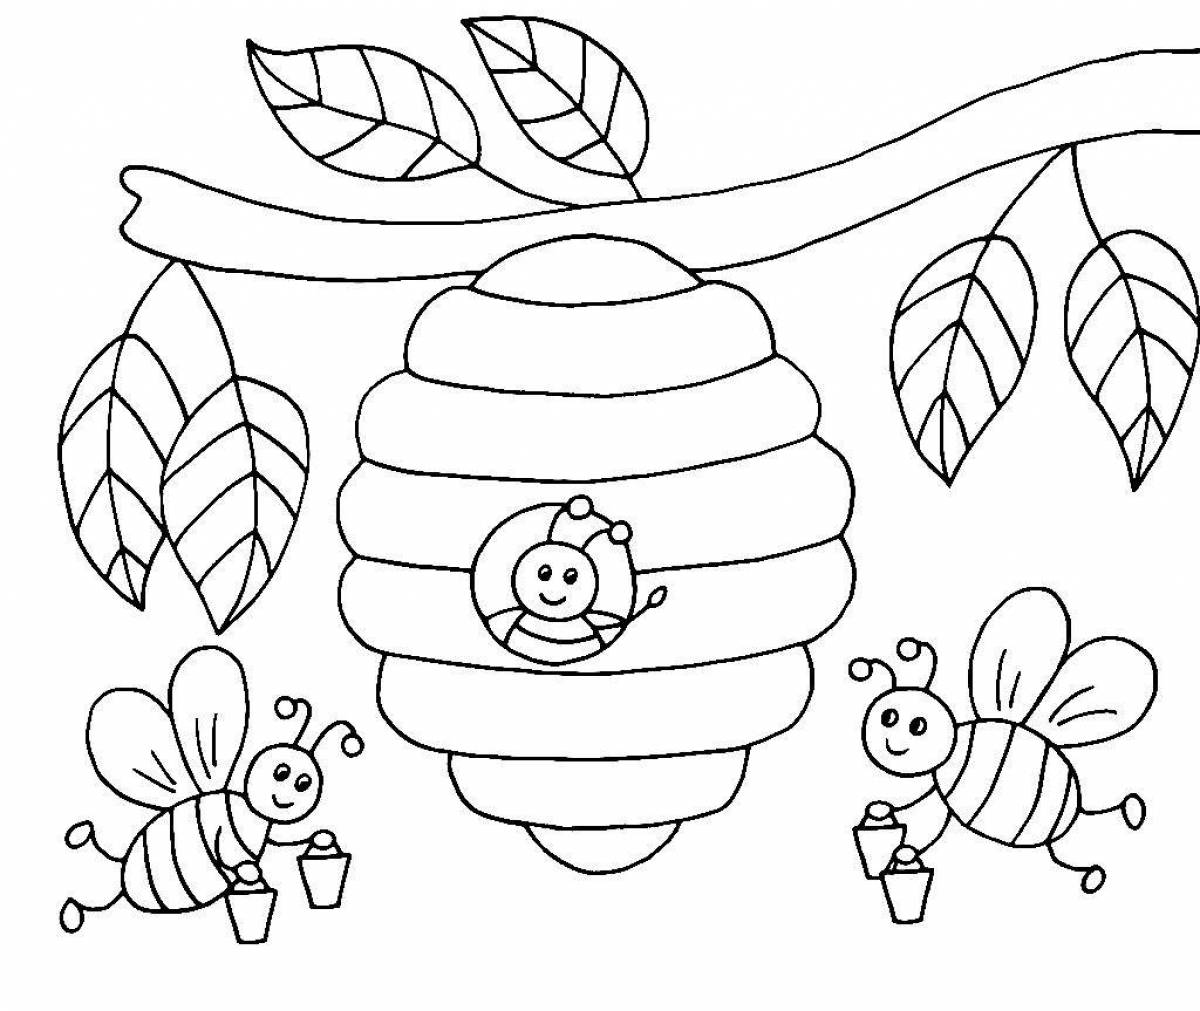 Outstanding honey coloring for toddlers